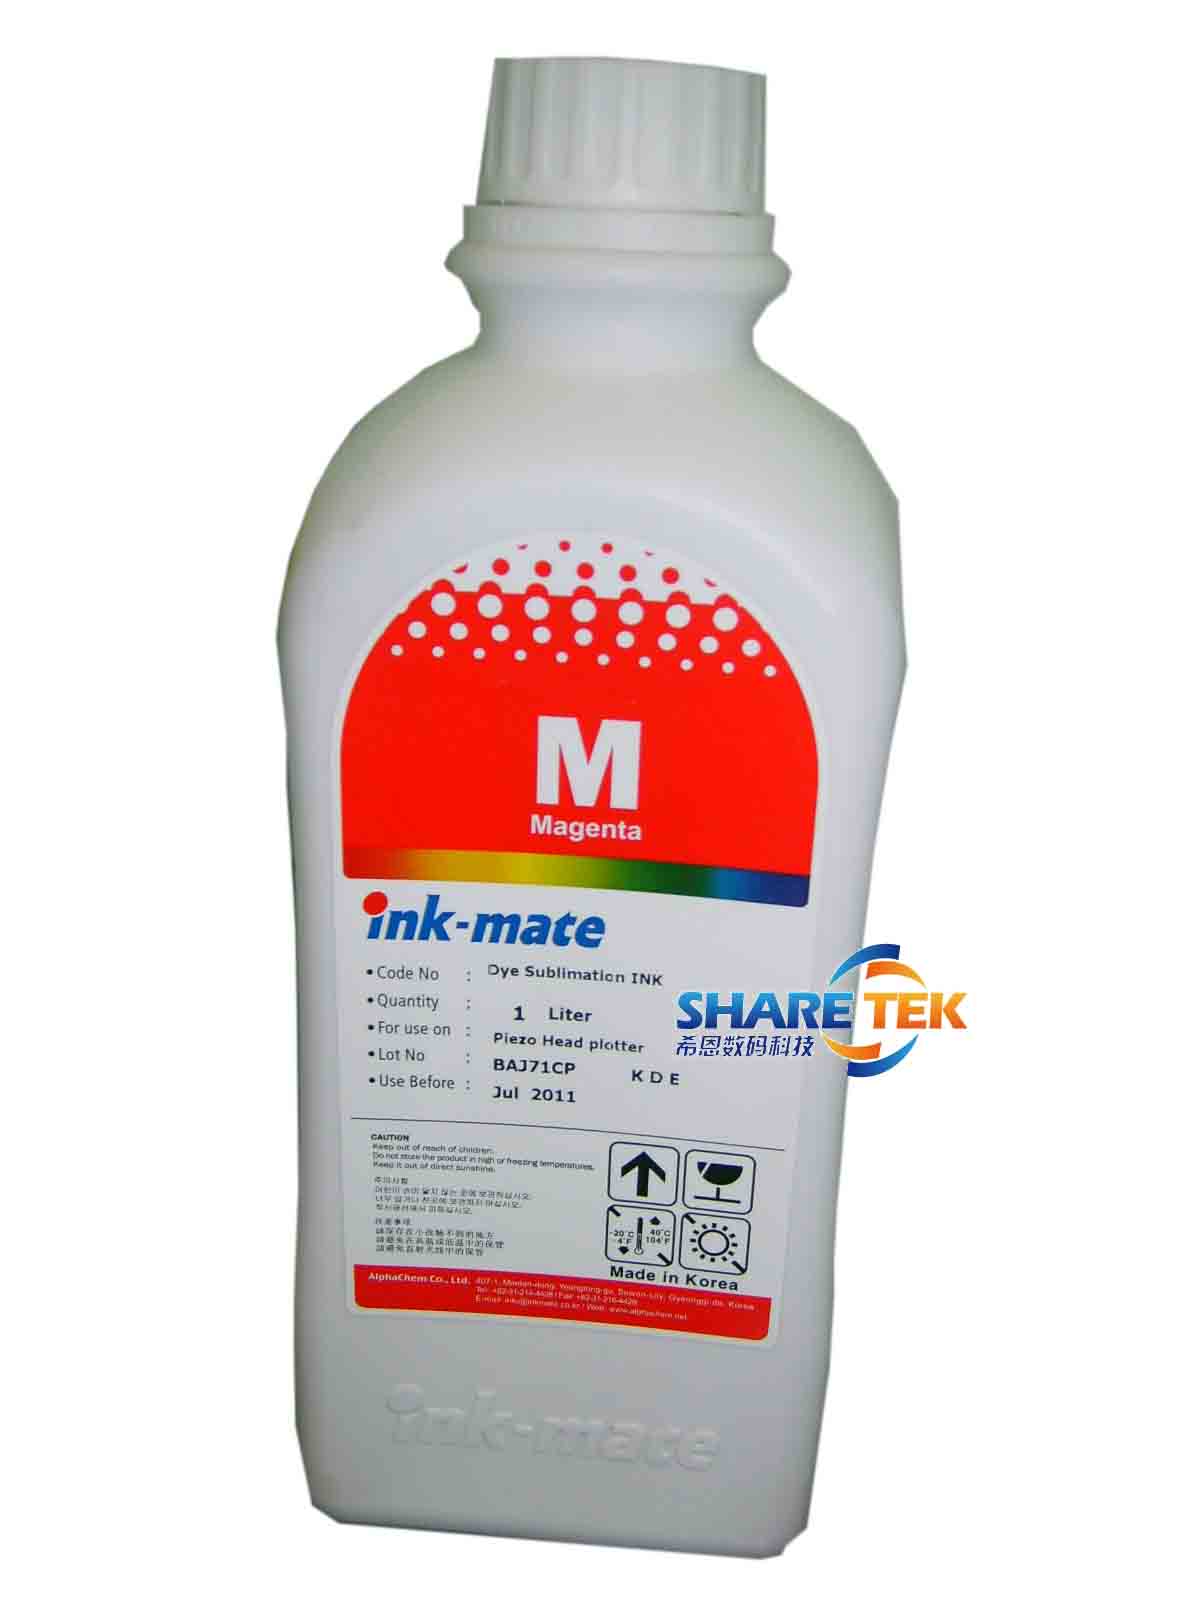 INKMATE sublimation ink from Korea